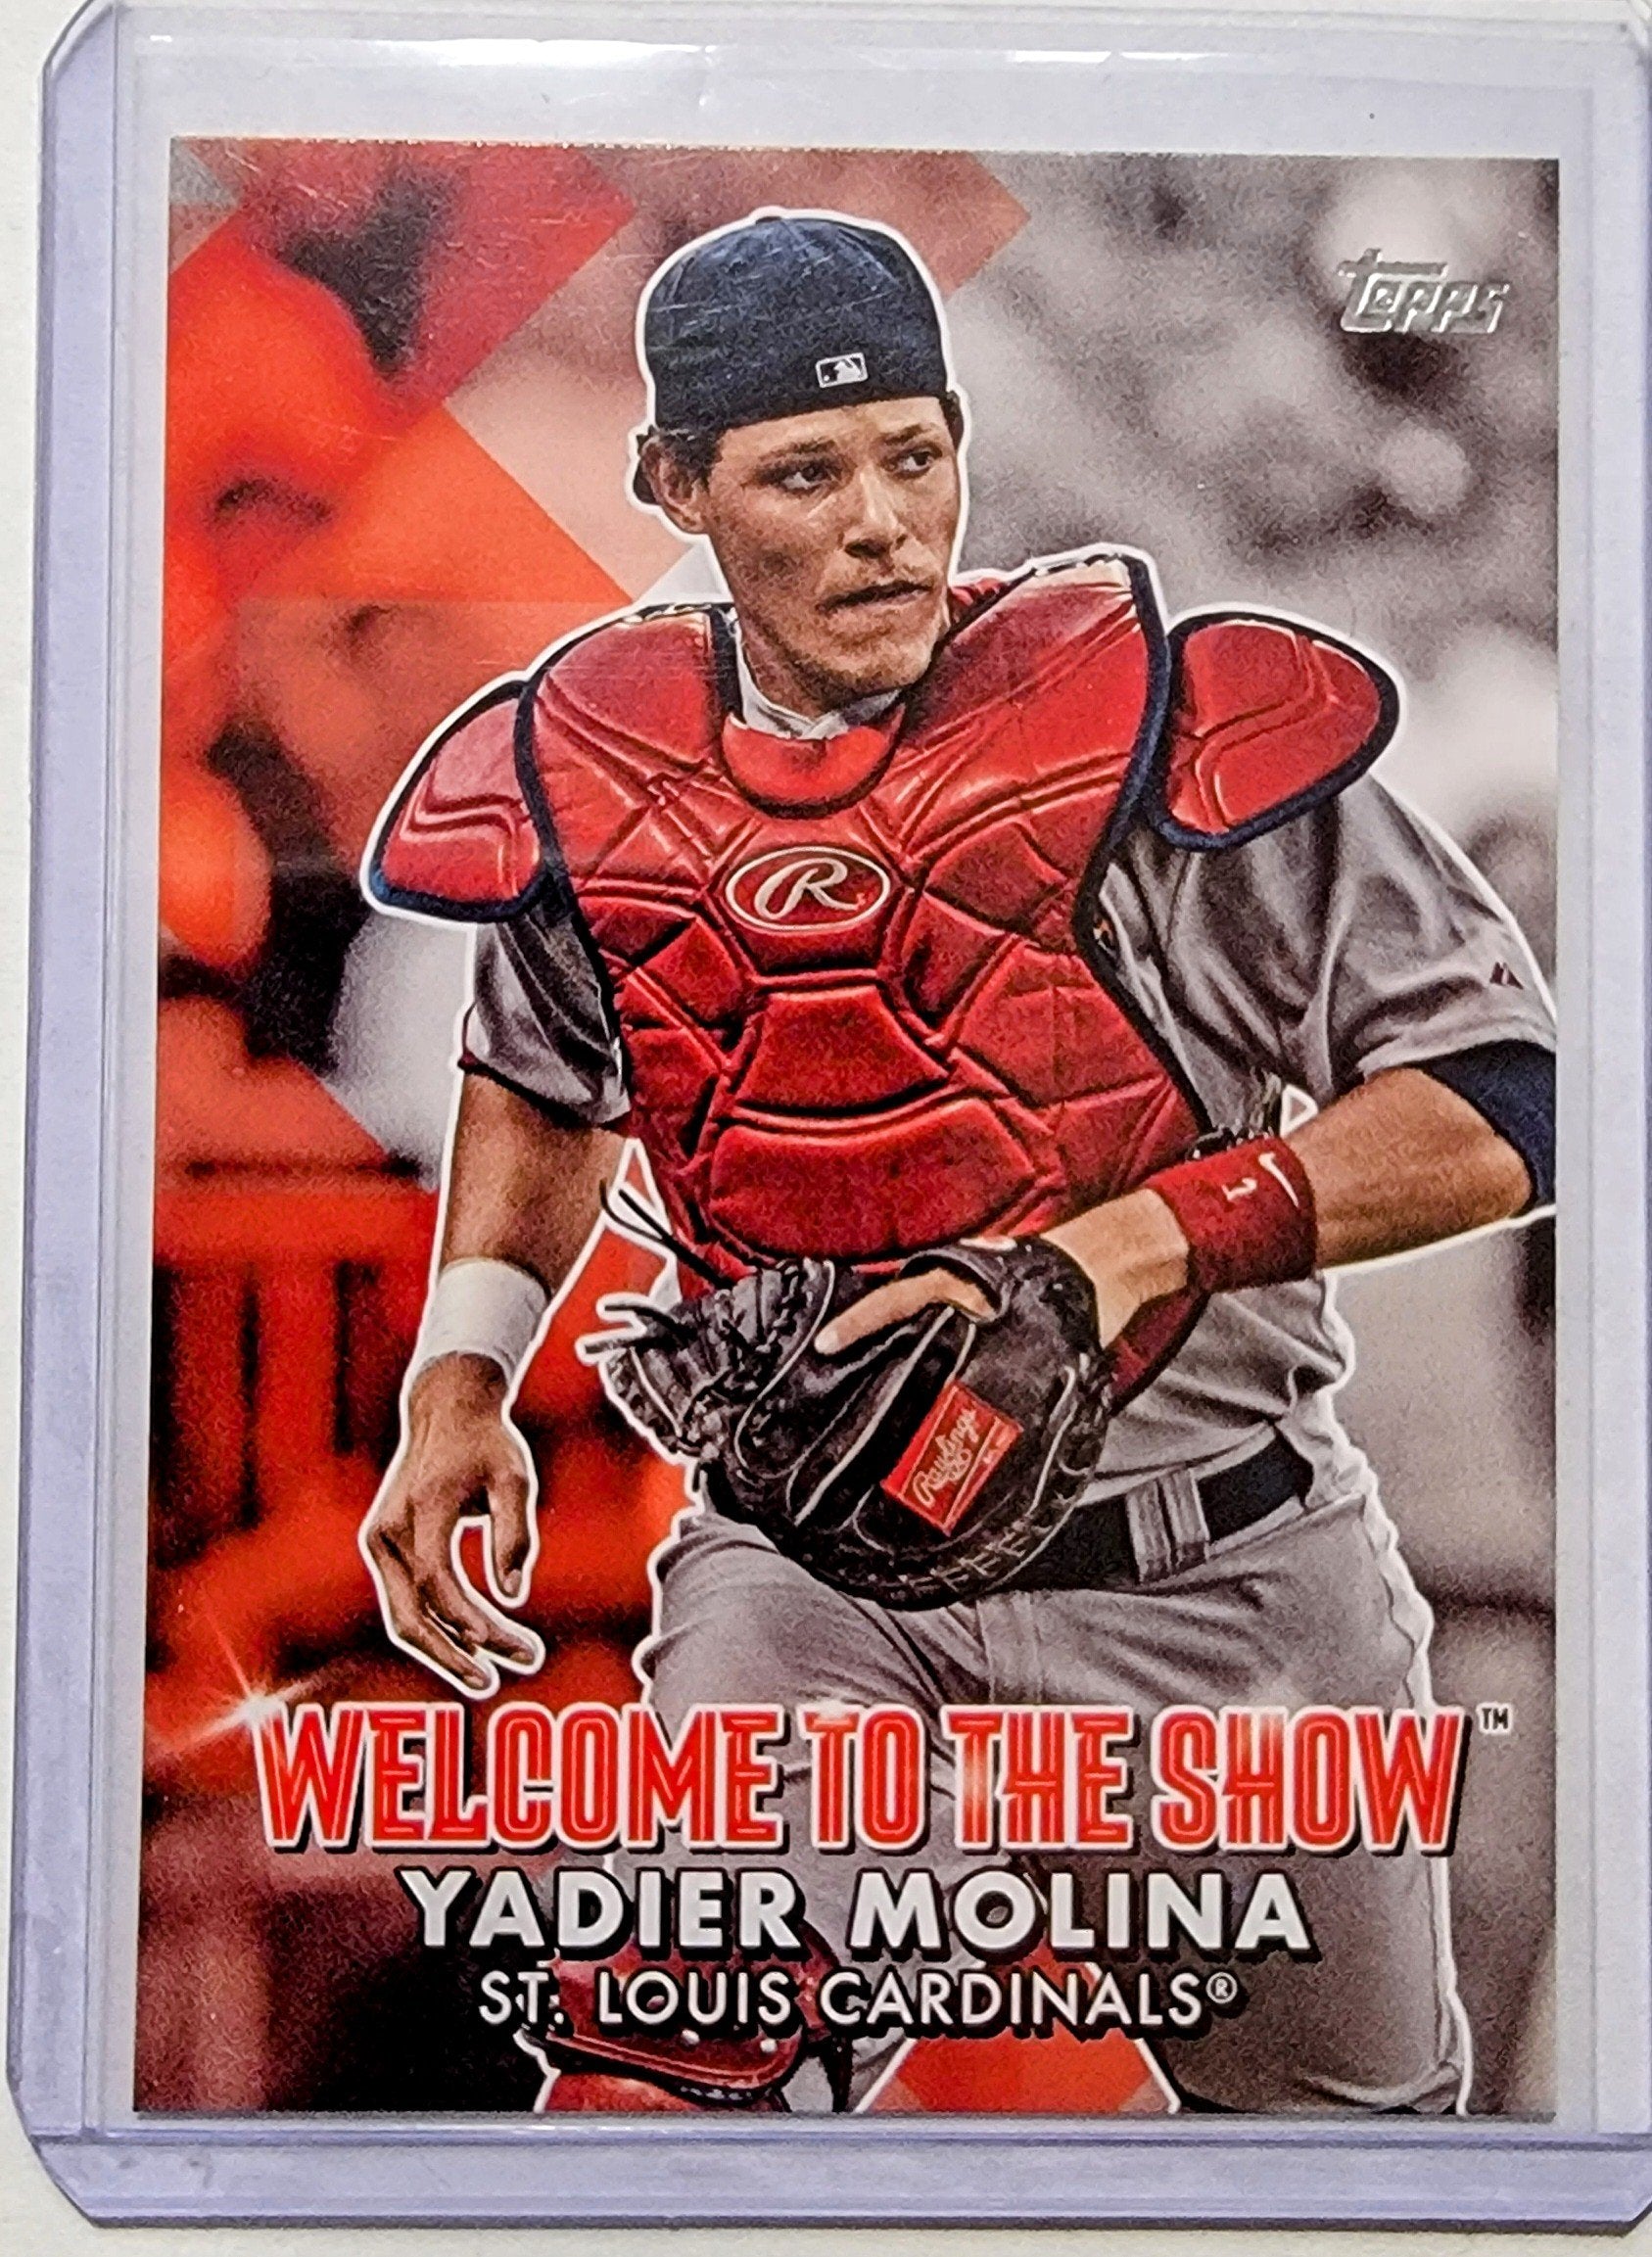 2022 Topps Series 2 Yadier Molina Welcome to the Show Insert Baseball Card AVM1 simple Xclusive Collectibles   